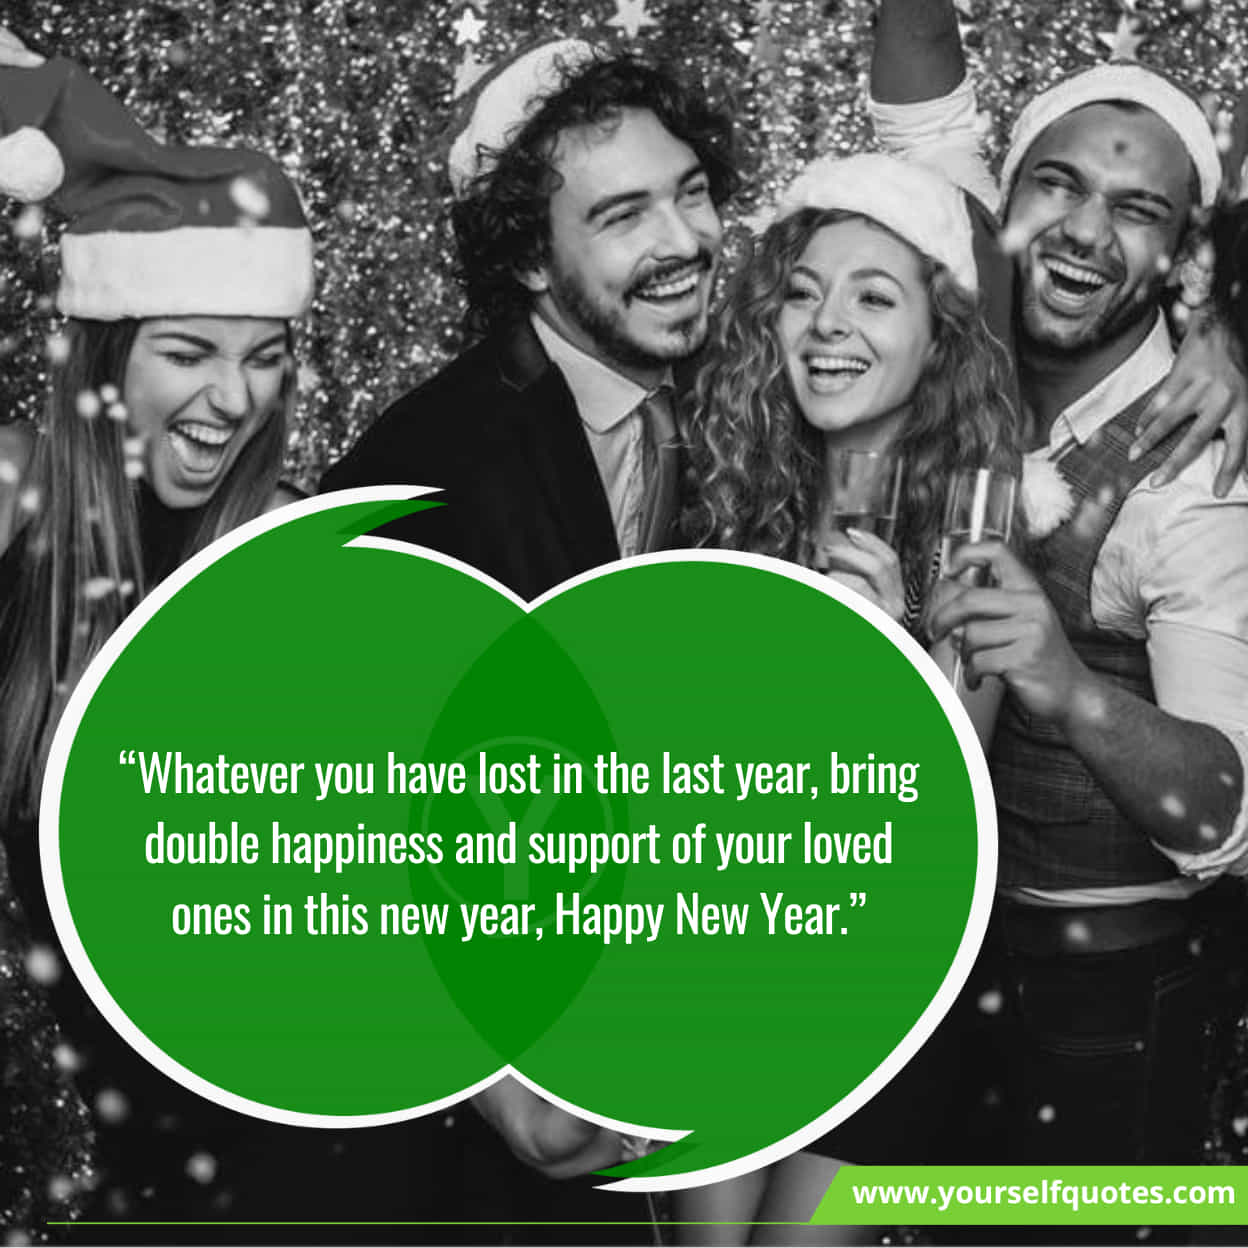 Alluring New Year Greetings for Loved Ones